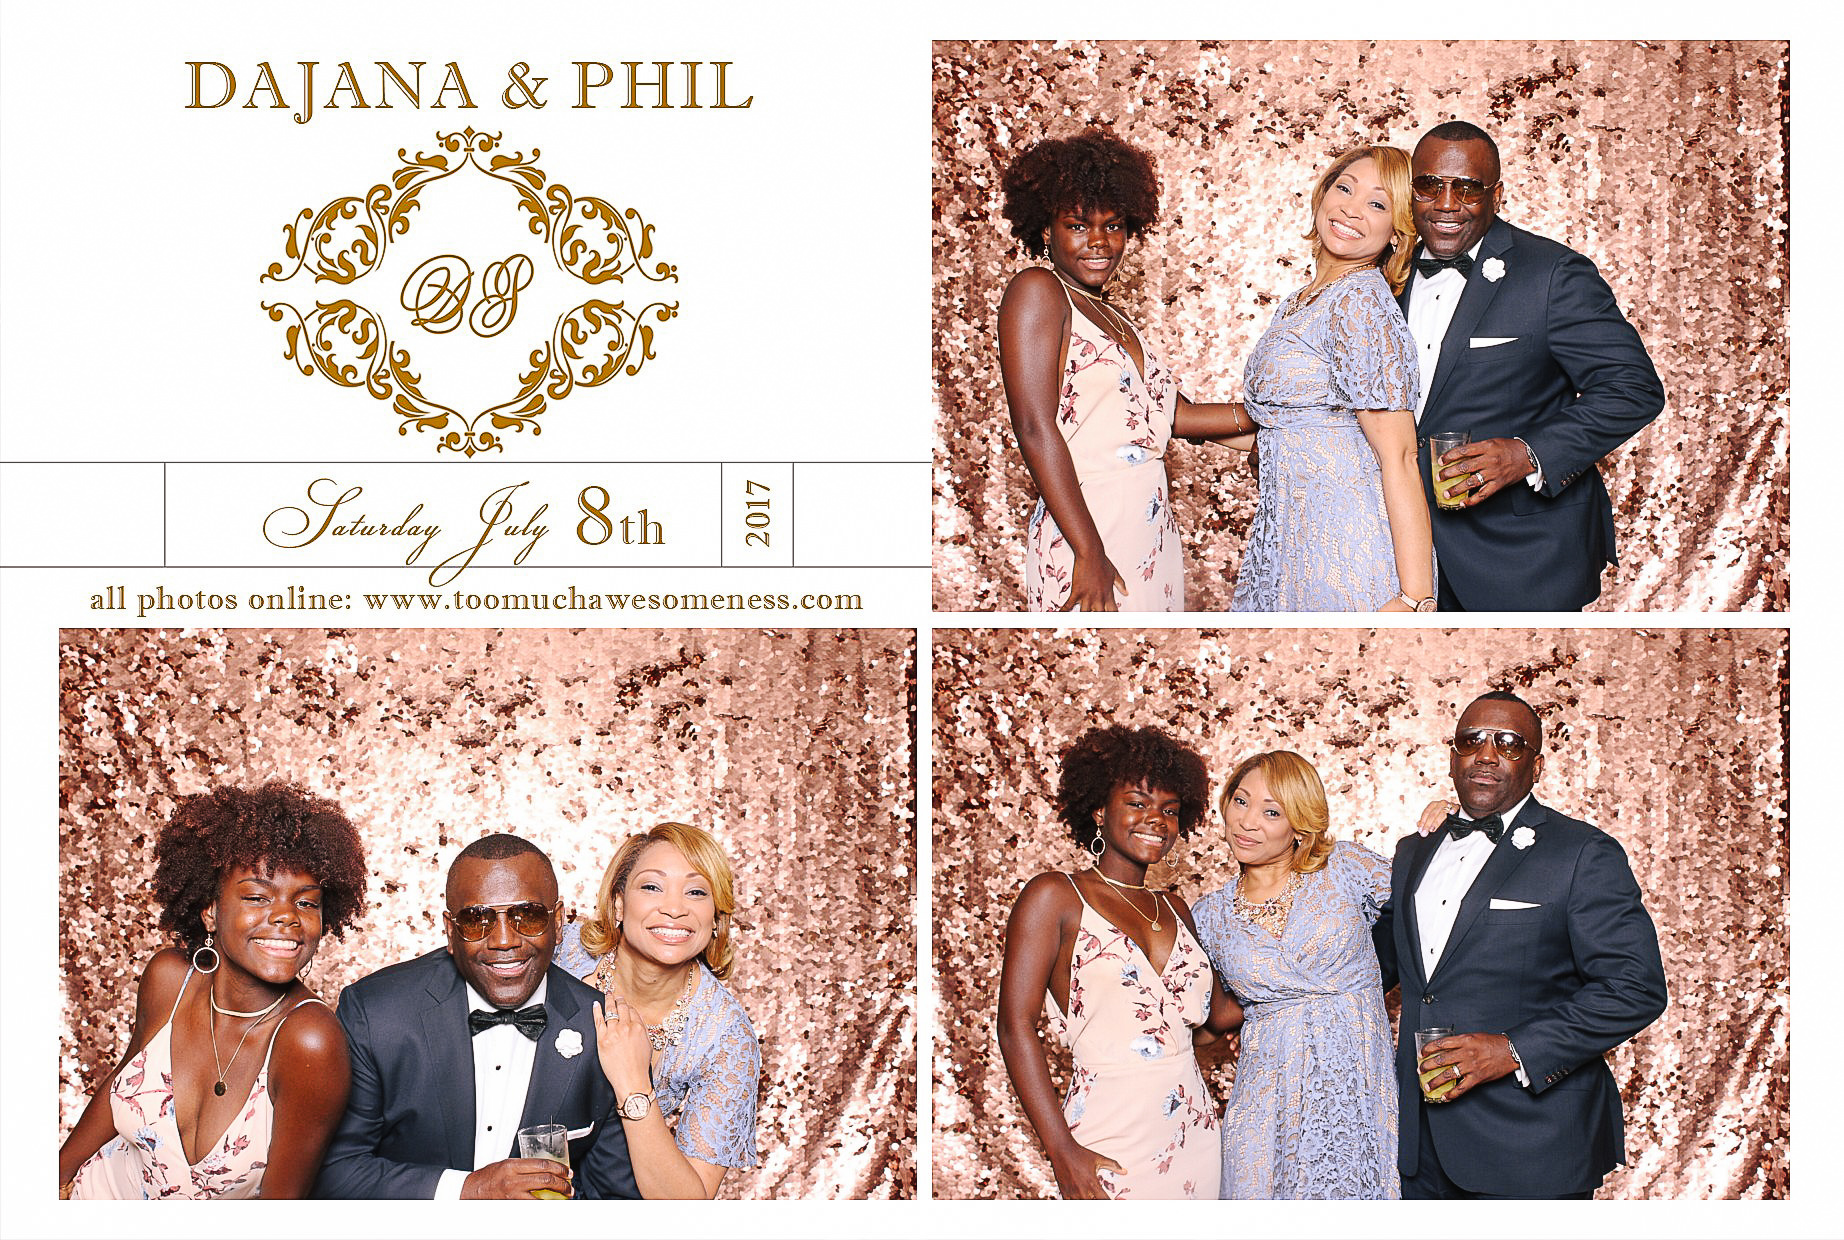 00200 Dajana and Phil Taylor Wedding Photos photobooth by too much awesomeness.jpg